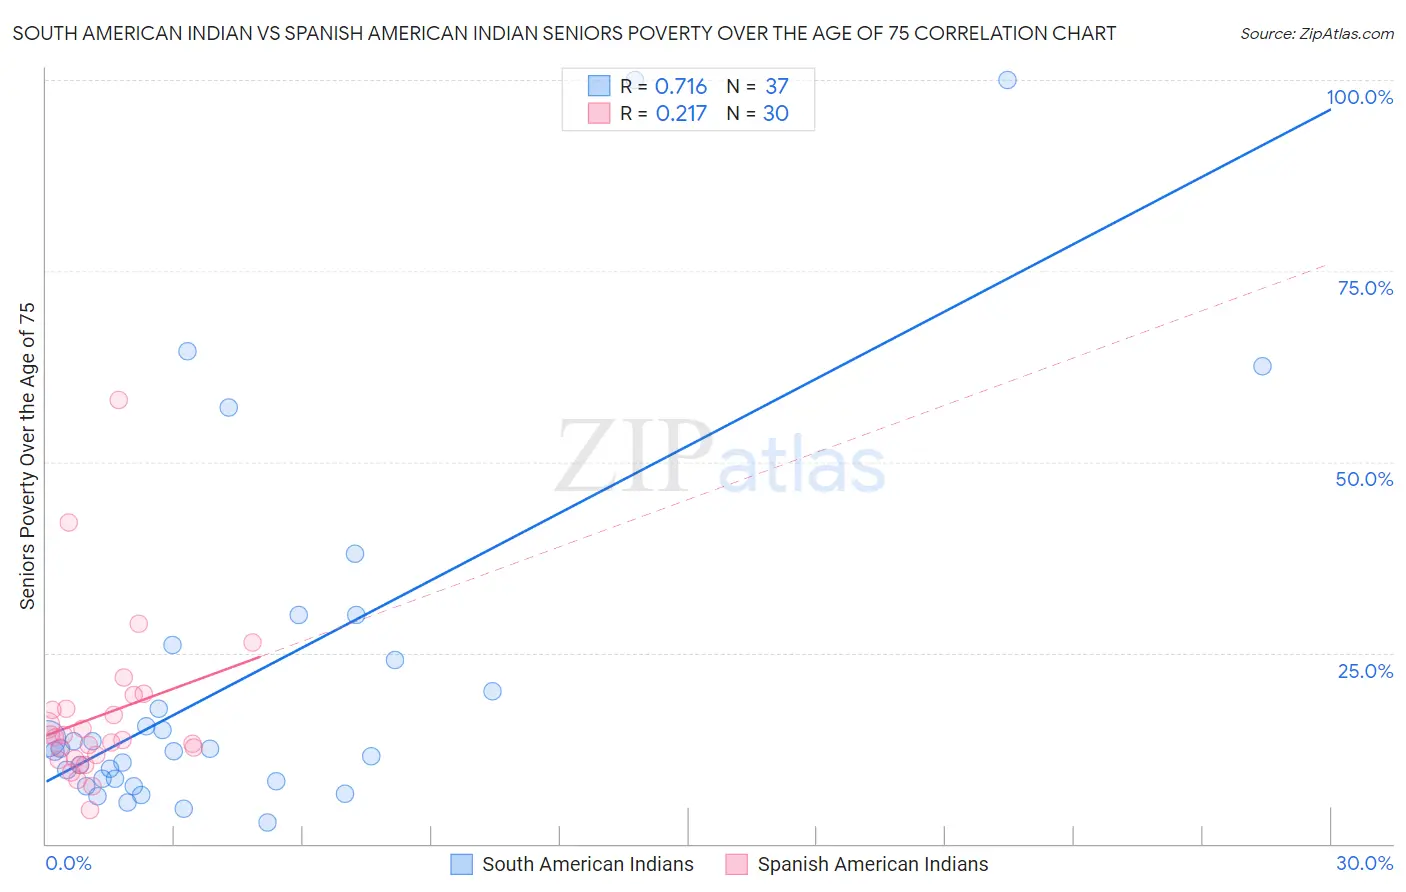 South American Indian vs Spanish American Indian Seniors Poverty Over the Age of 75